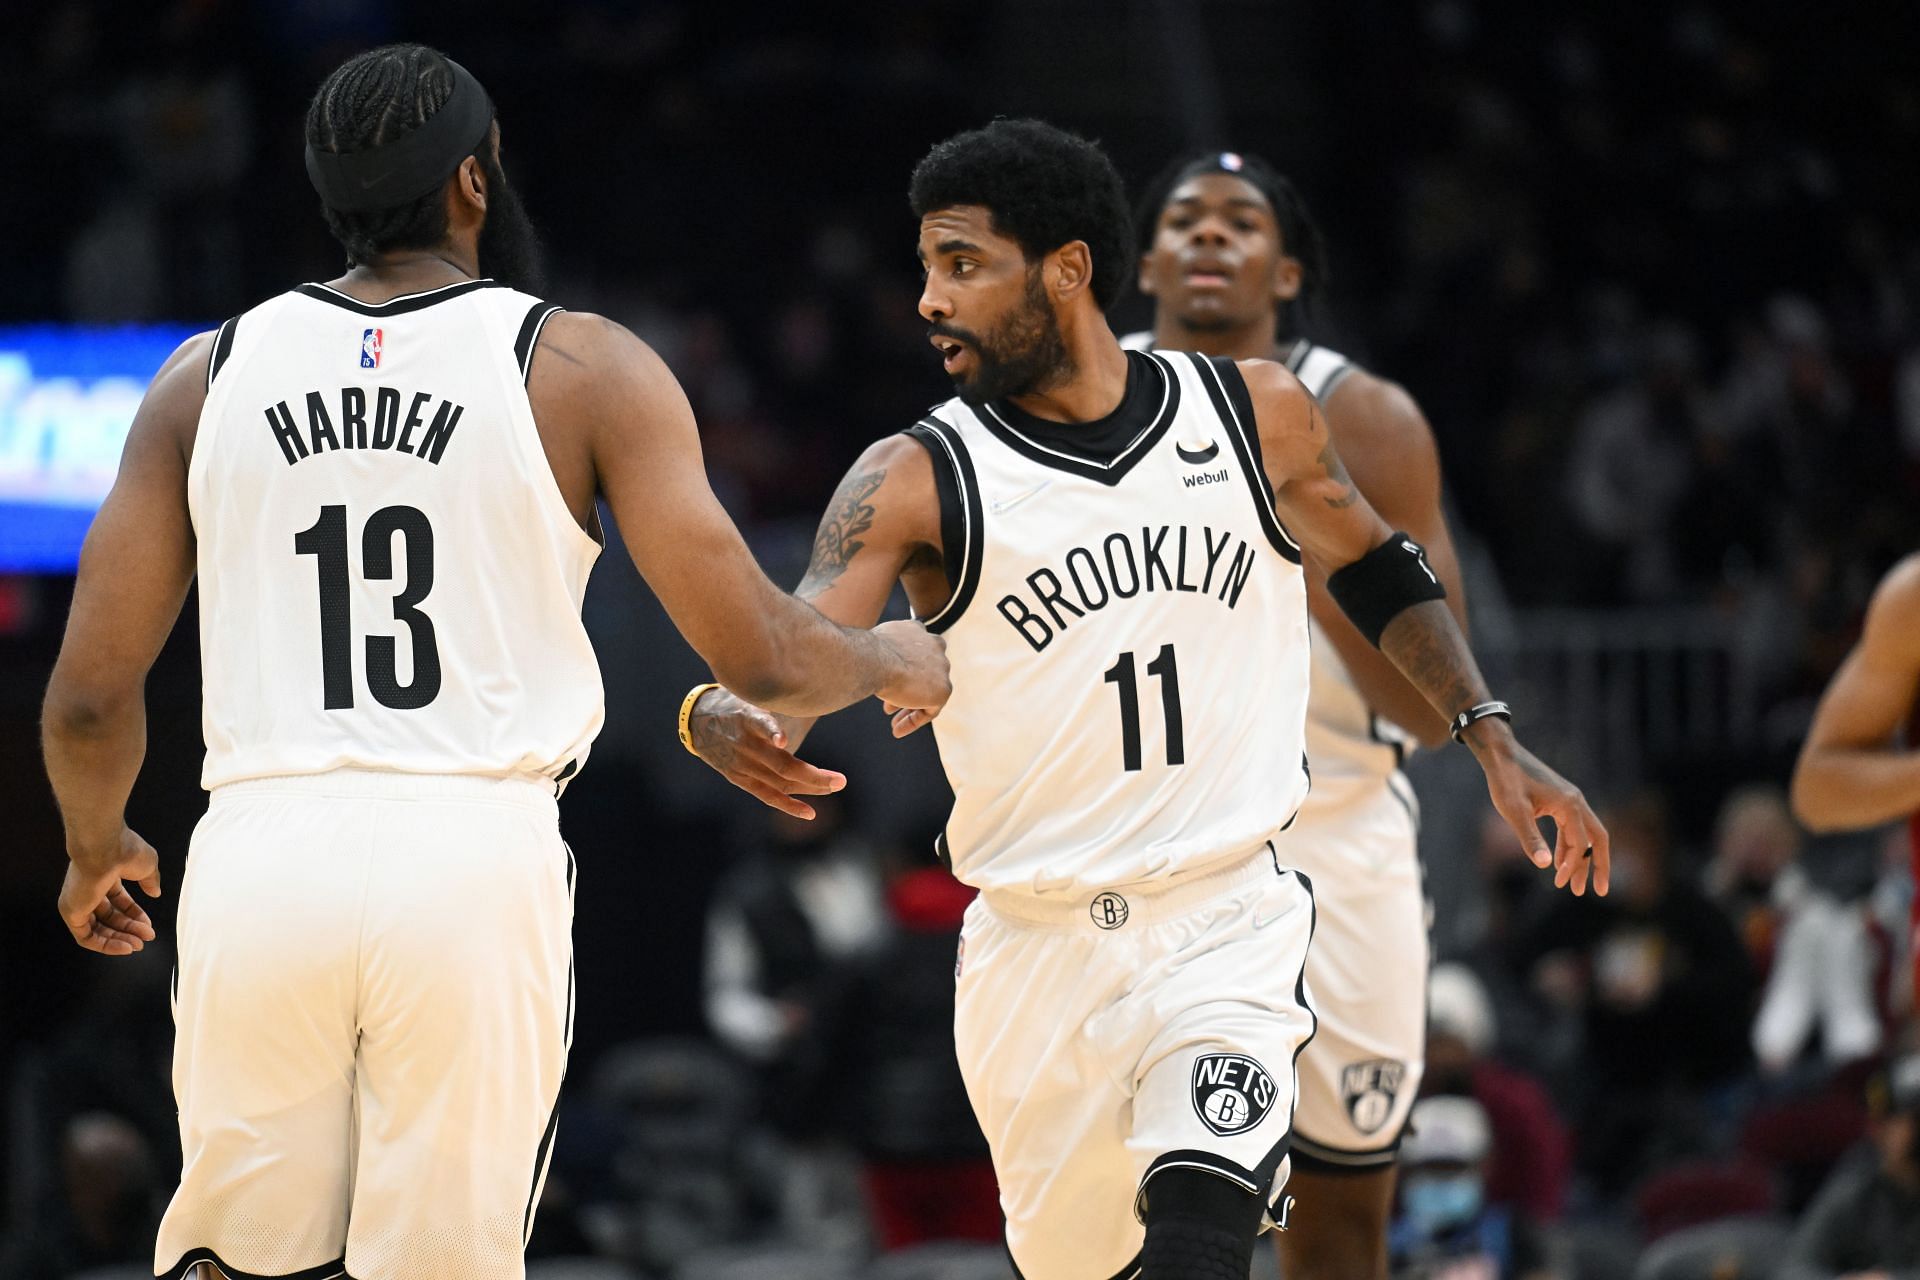 Kyrie Irving, James Harden and Kevin Durant played only 16 games together for the Brooklyn Nets